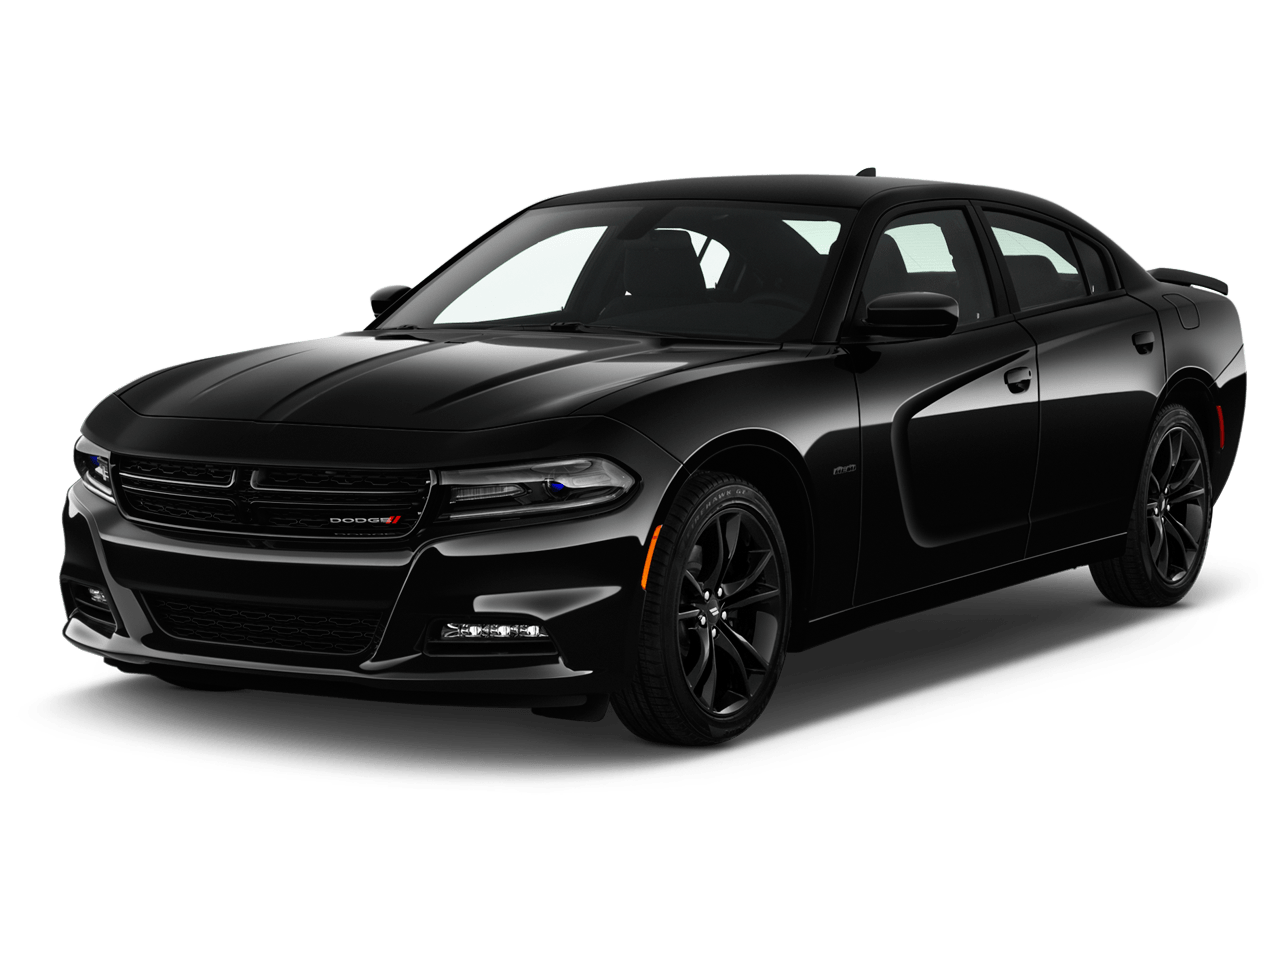 Charger2018